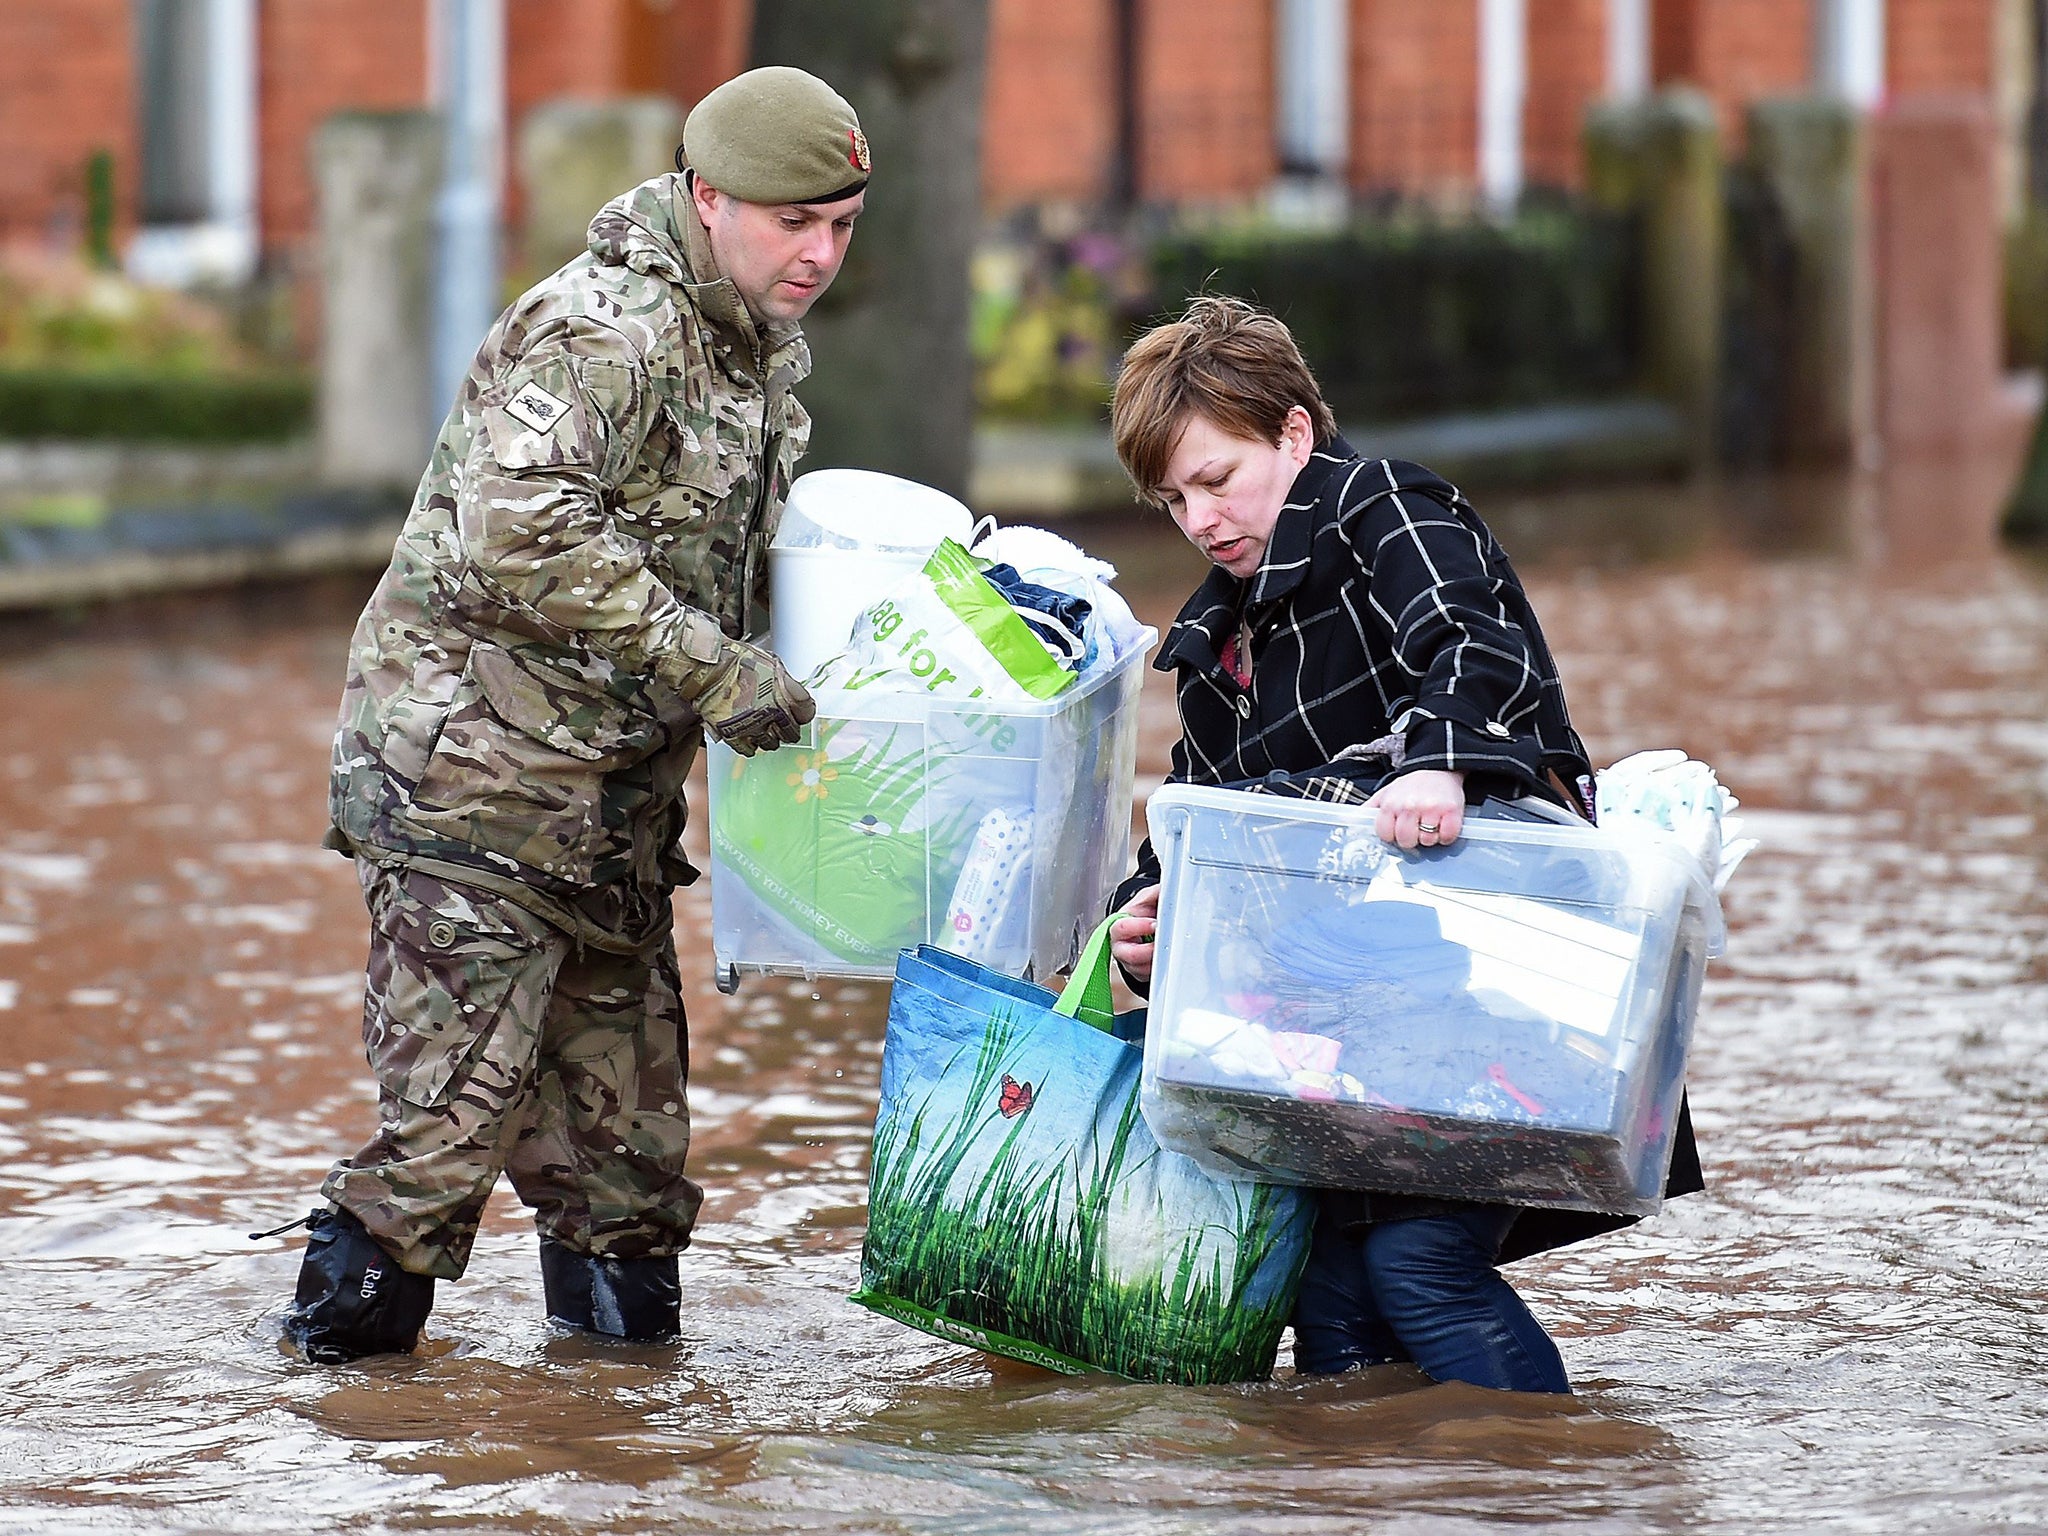 &#13;
A member of the British army helps a woman carry belongings through a flooded street in Carlisle (Getty)&#13;